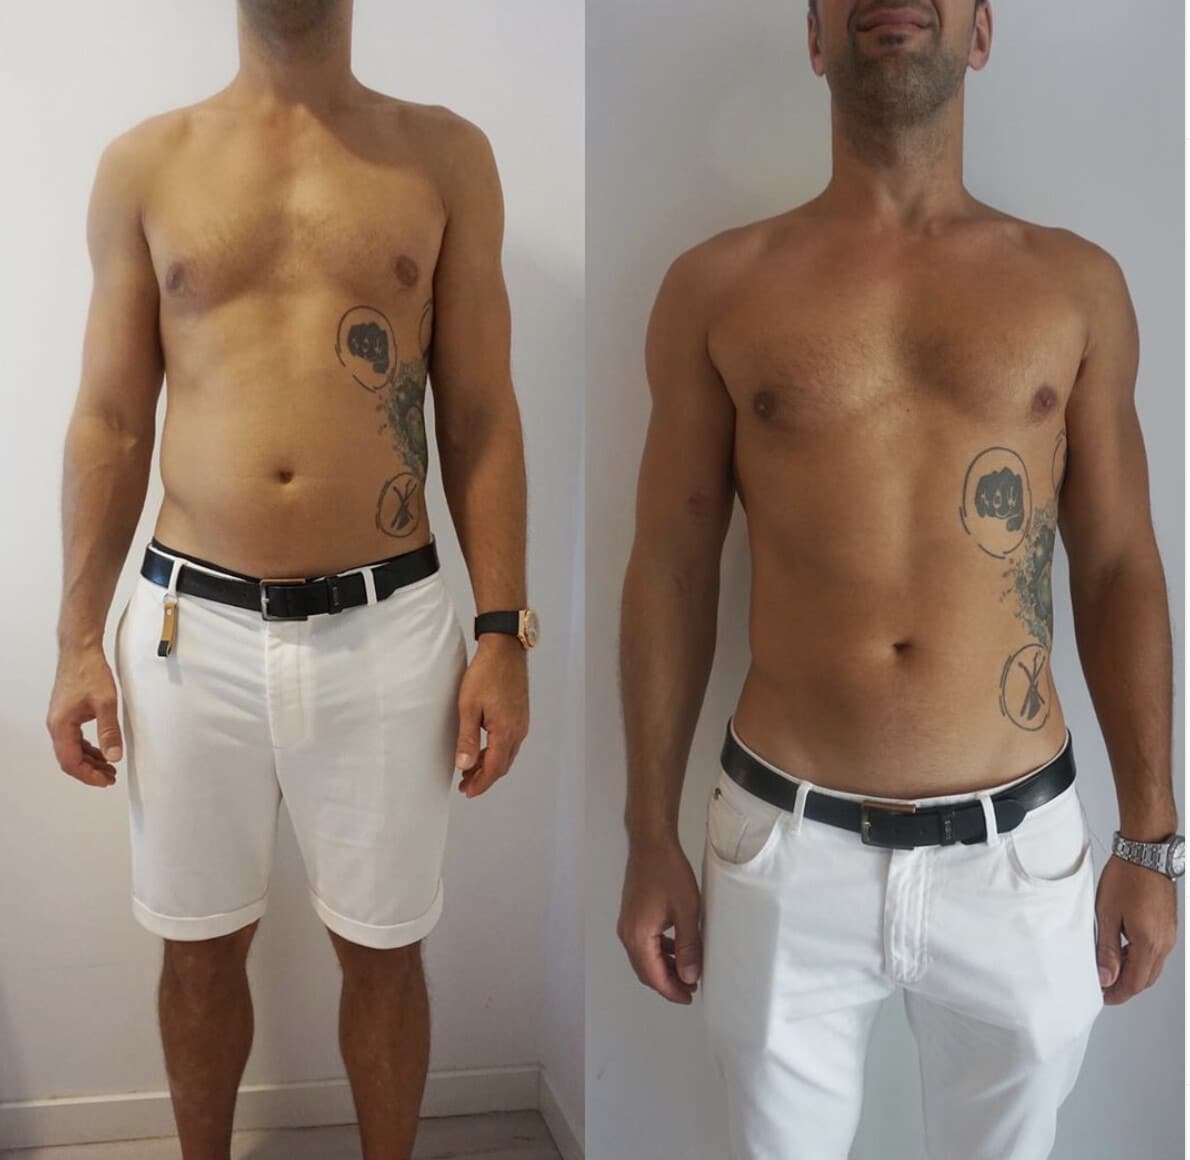 Before And After Cryotherapy Treatment Photo